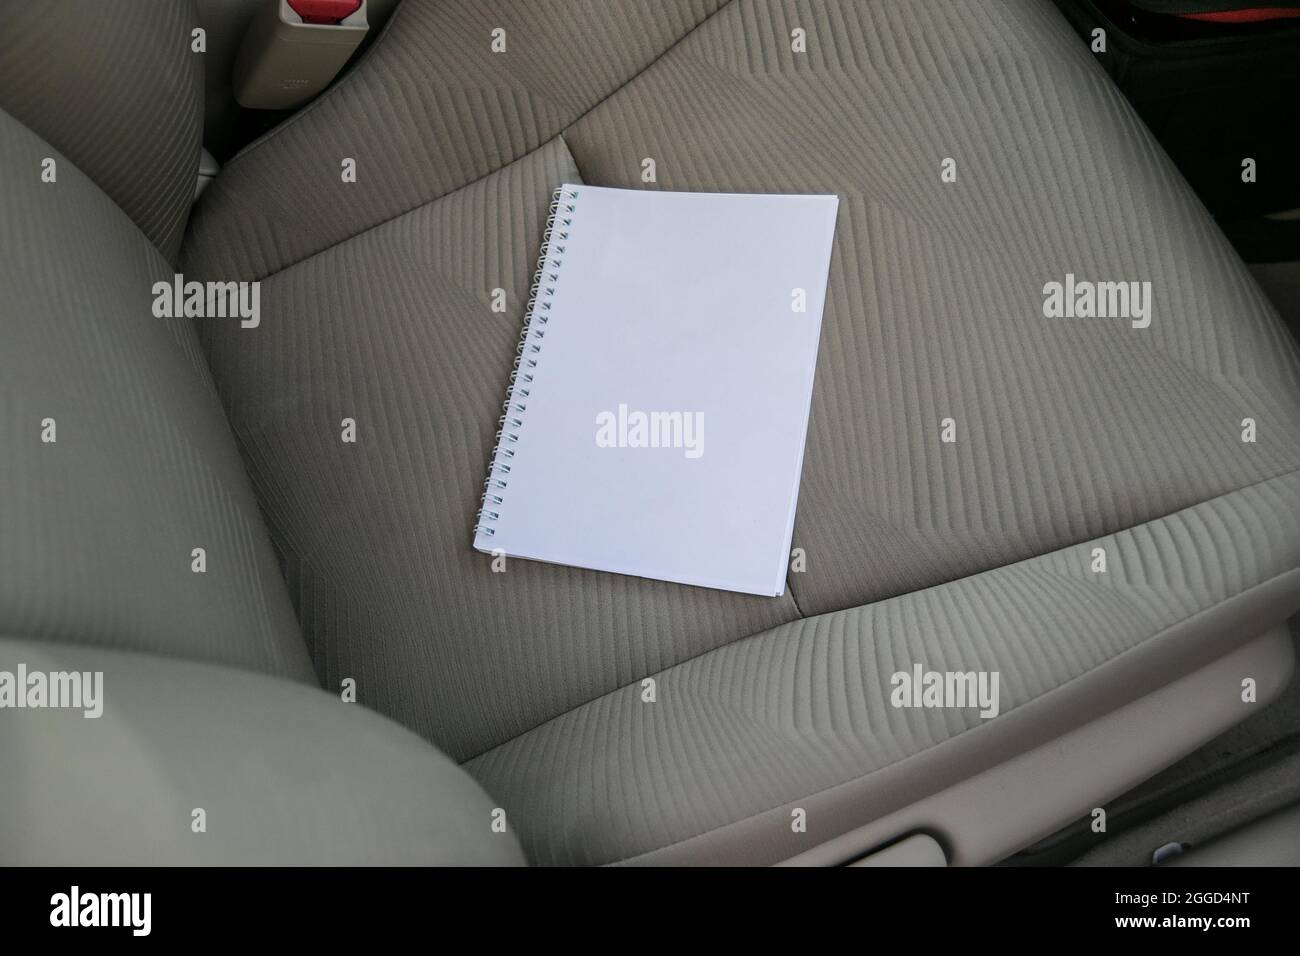 Open Notebook with Blank White Empty Clear Pages on the Car Sit Stock Photo